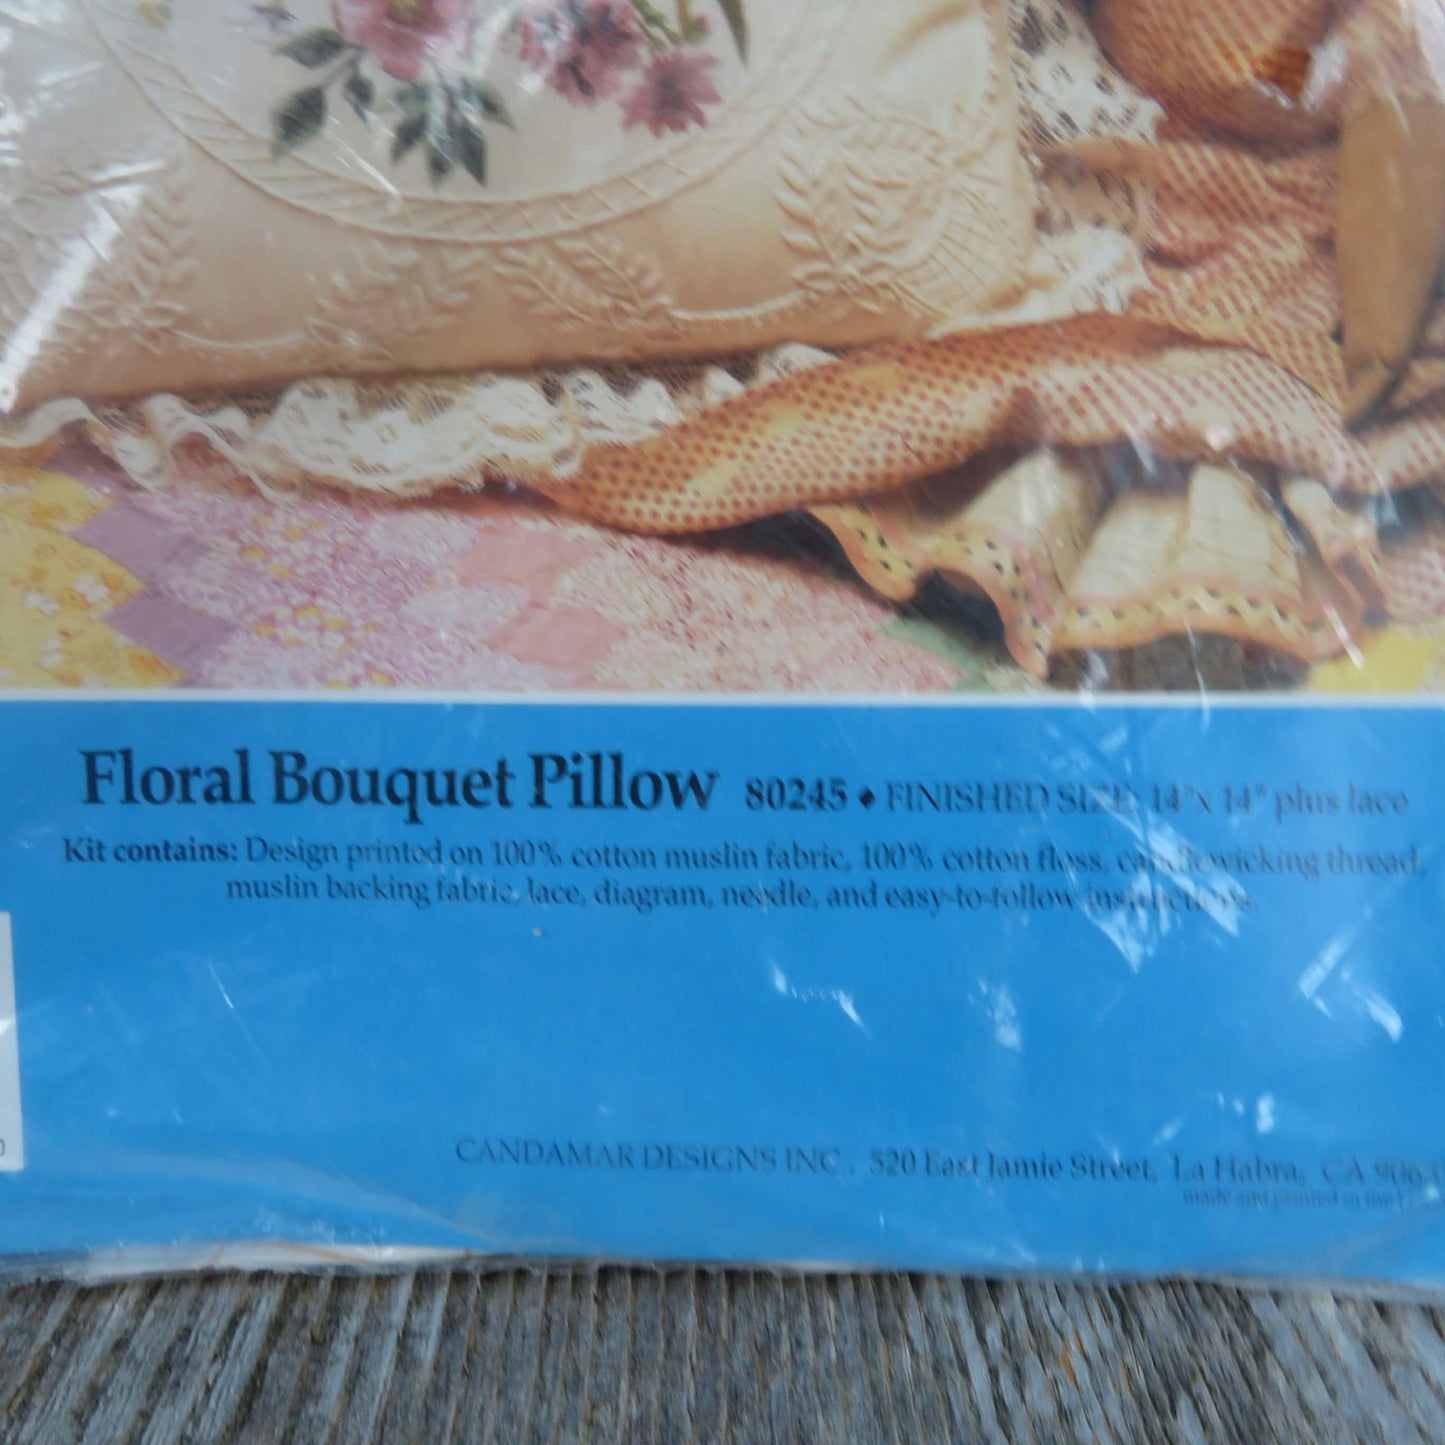 Vintage Candamar Designs Candlewicking Embroidery Floral Bouquet Pillow 14 Inch